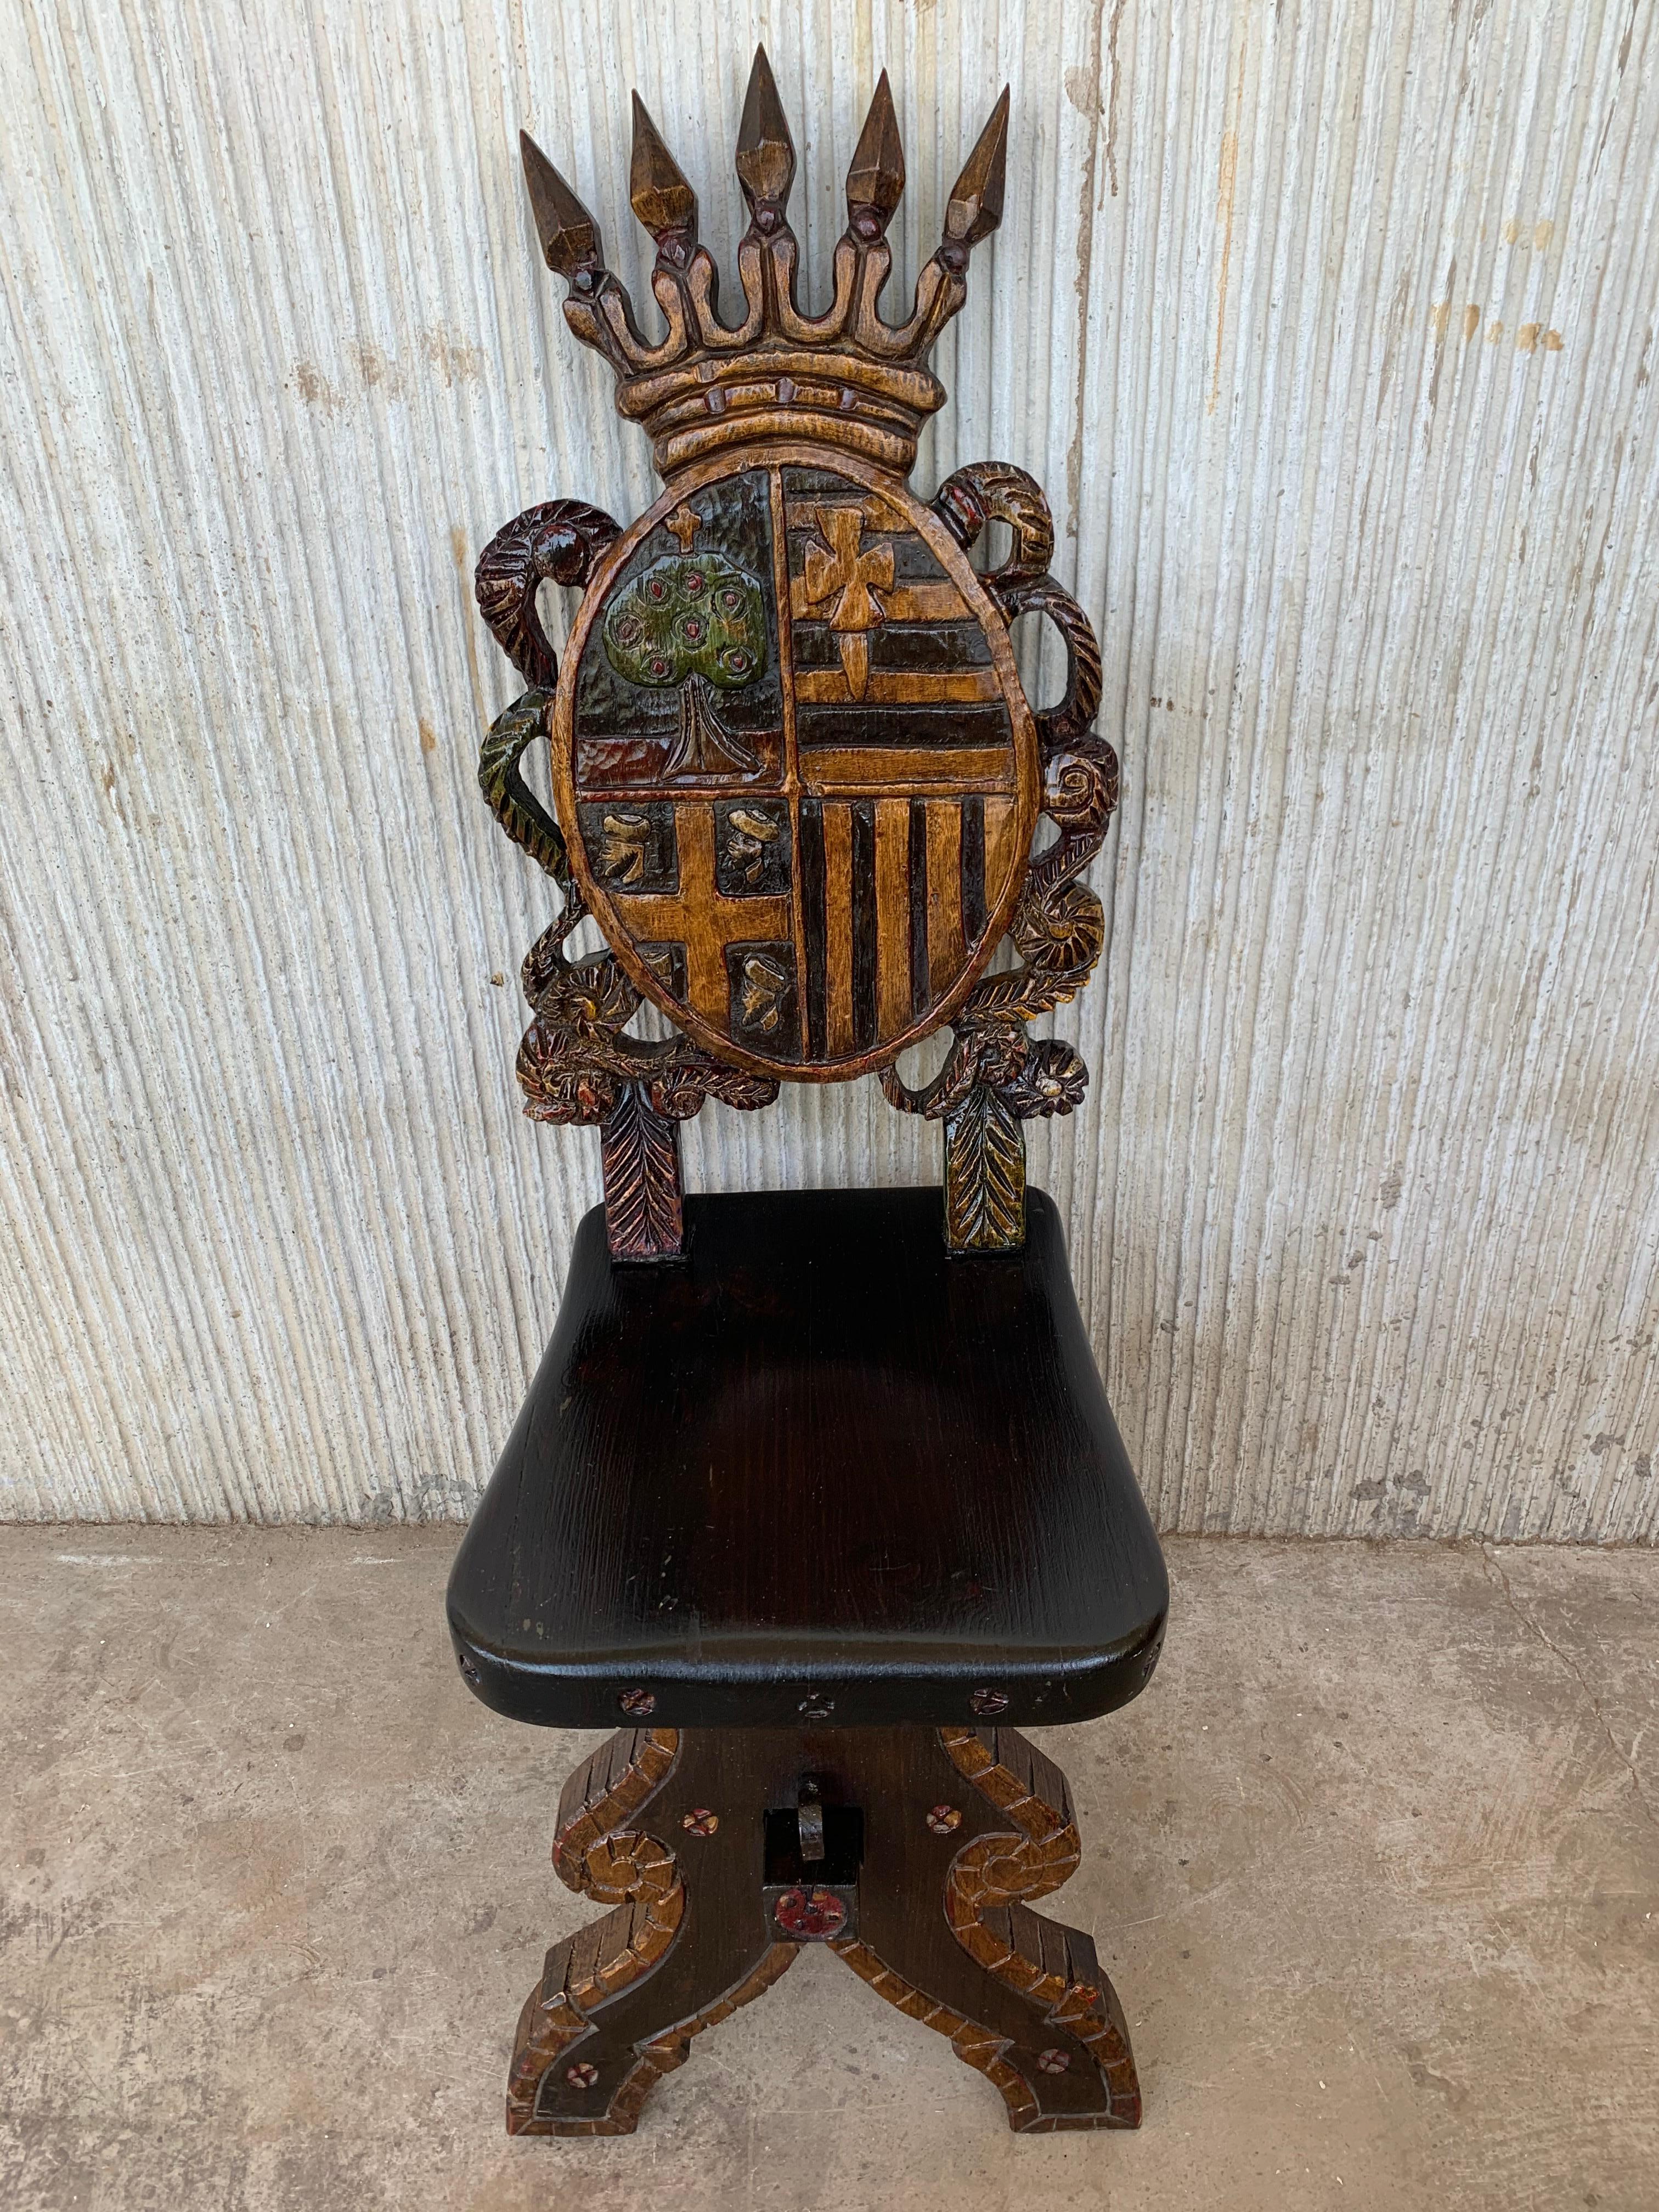 Spanish Sgabello carved side chair or stool depicting shields from Spain. 
Original polychrome 
It has a large crest featuring a crown.
 